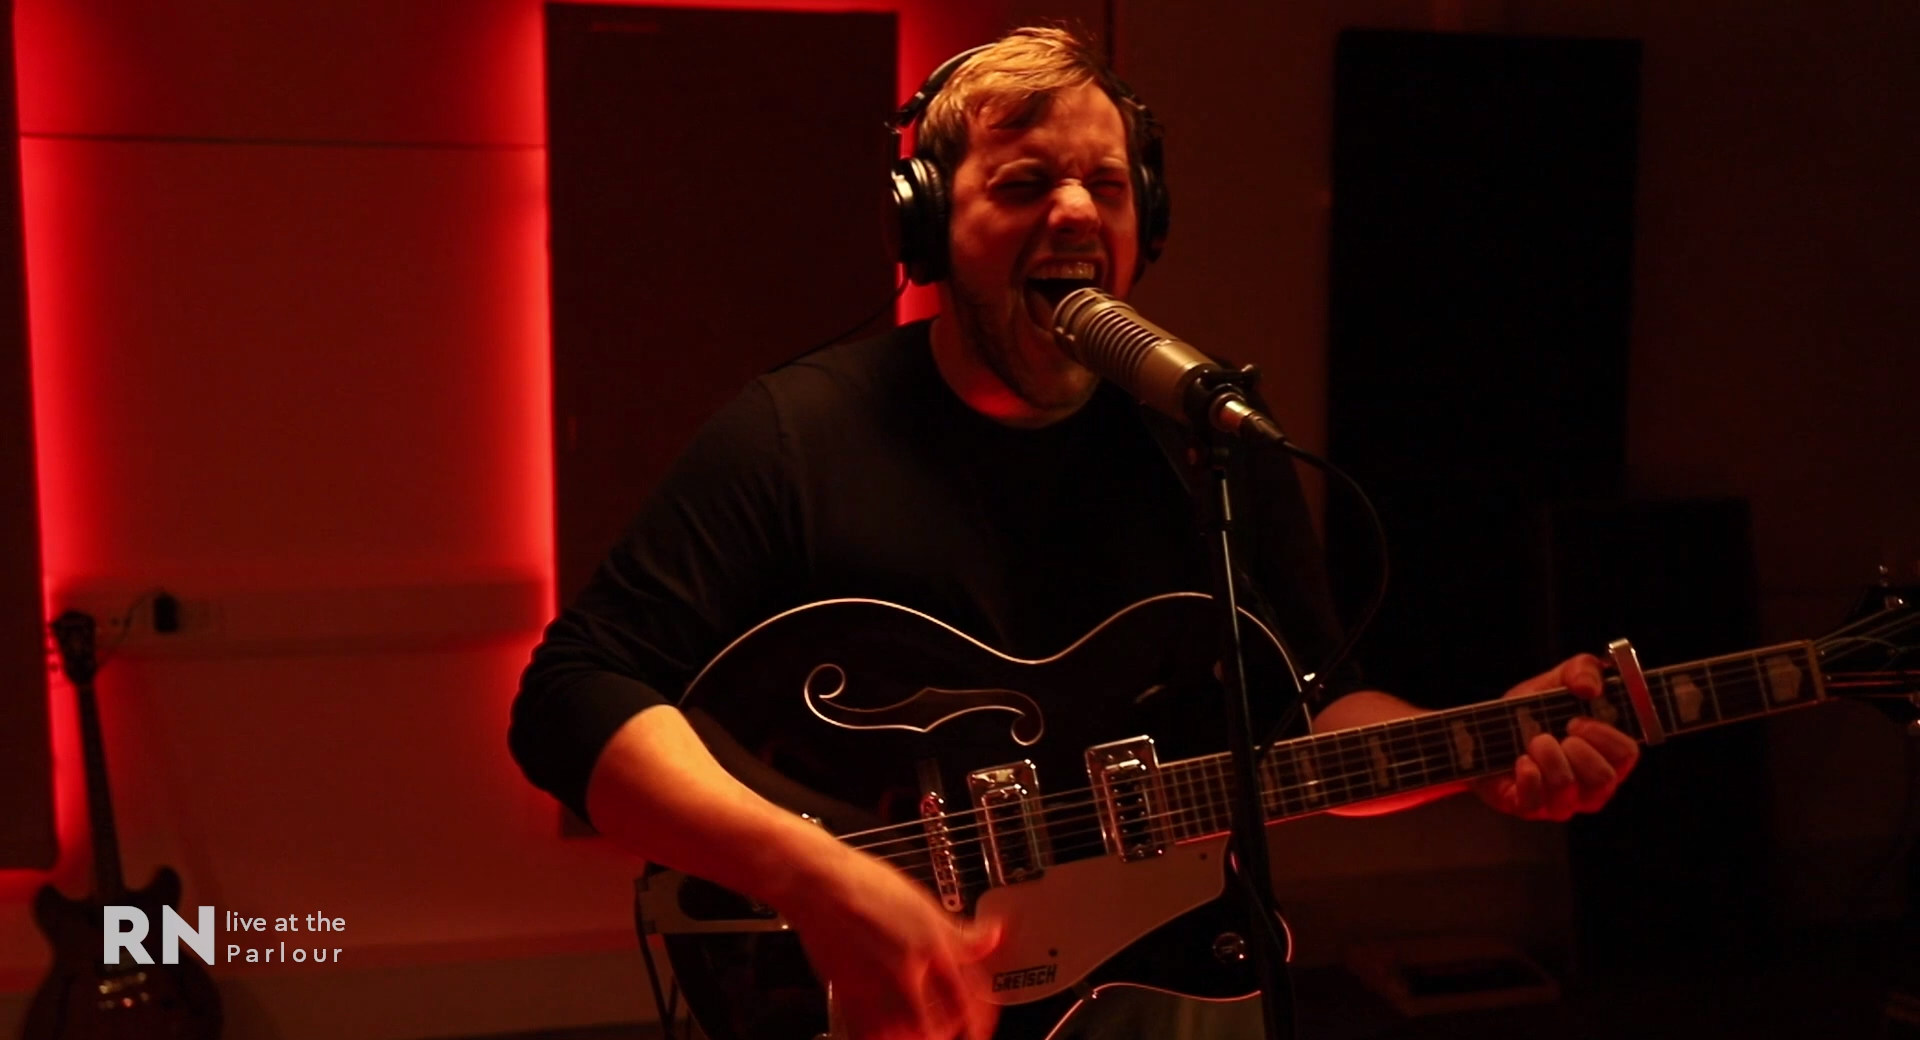 This live session will encapsulate you with it’s beauty